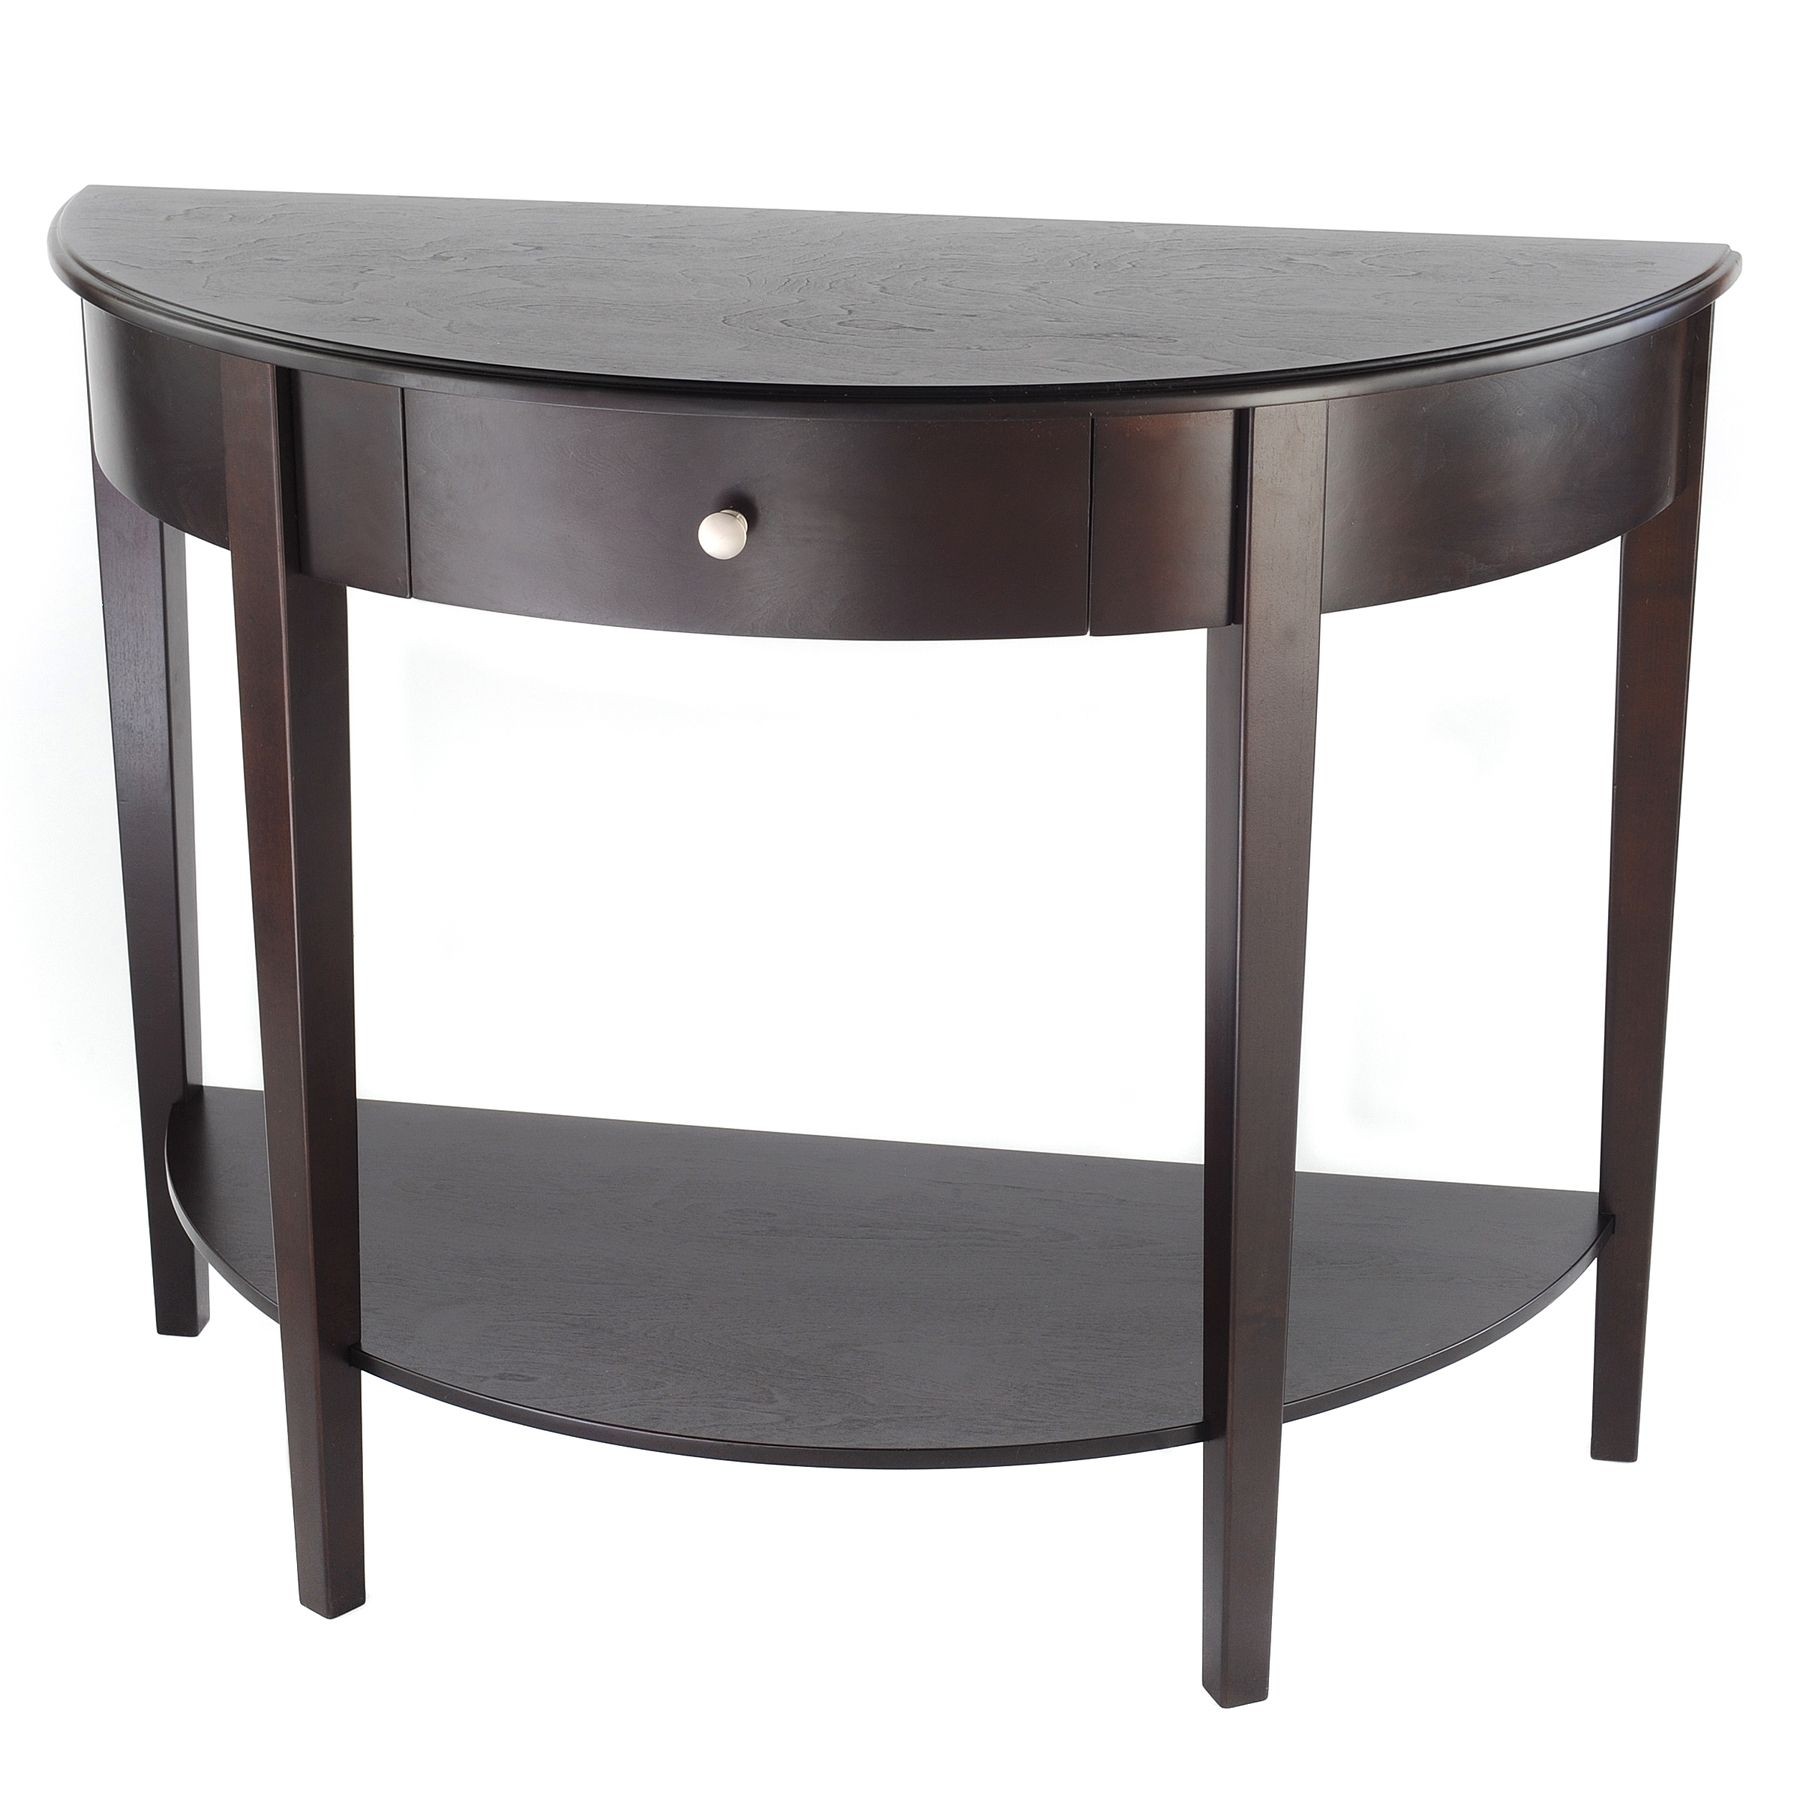 Wildon Home %c2%ae Bay Shore Large Half Moon Console Table